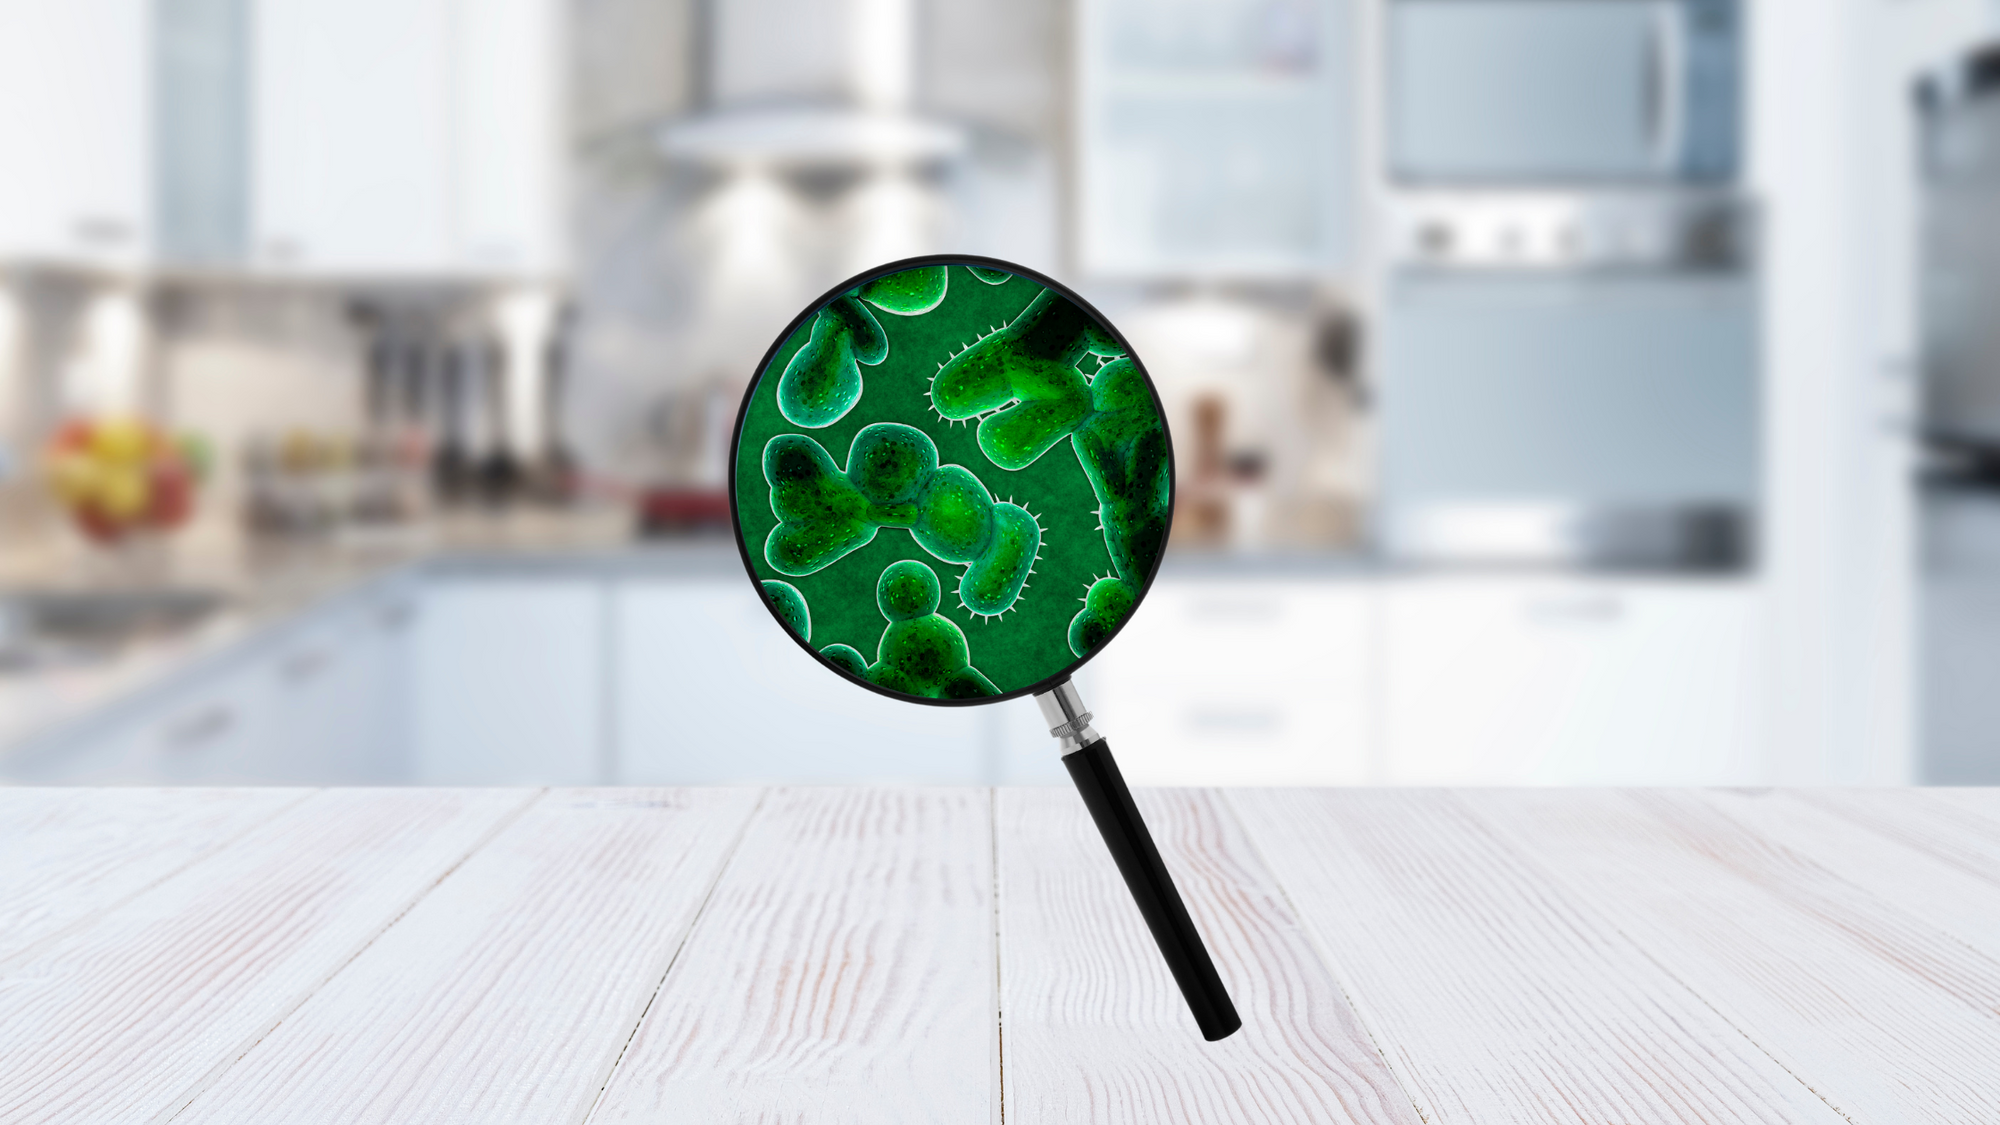 Kitchen Contamination: The Truth About Hidden Germs and How to Beat Them